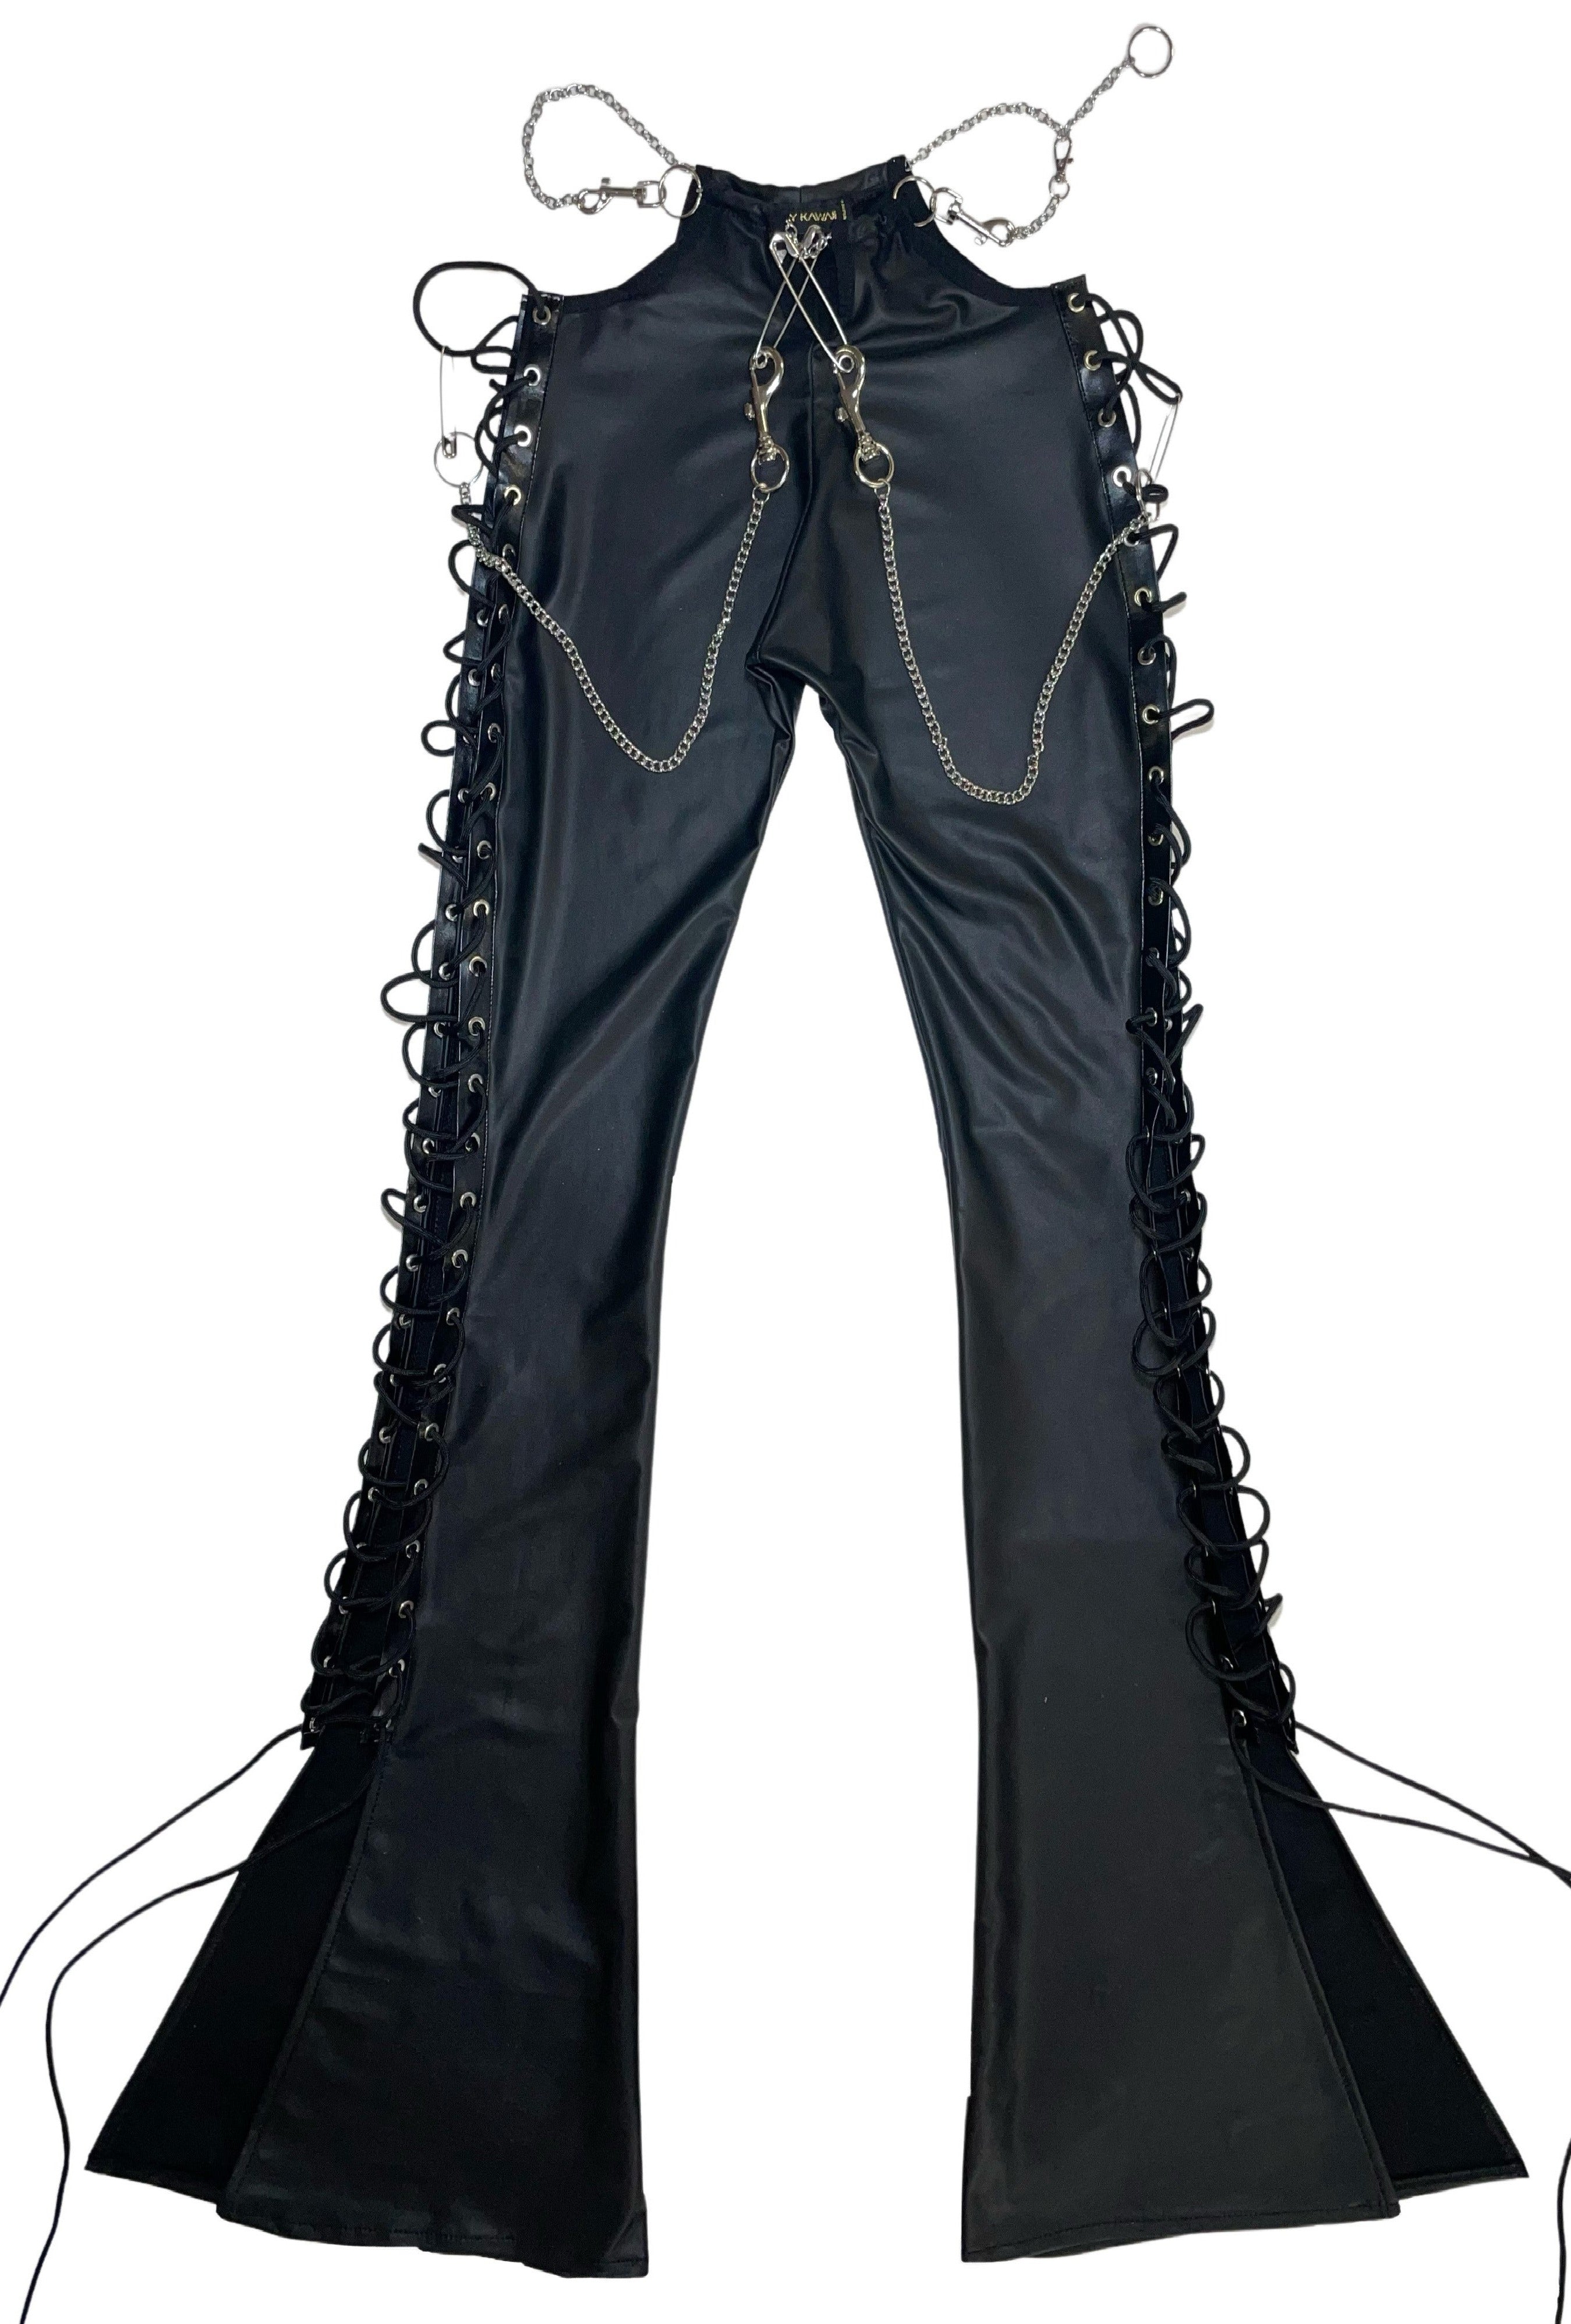 Cut Out Black Jeans With Chains 